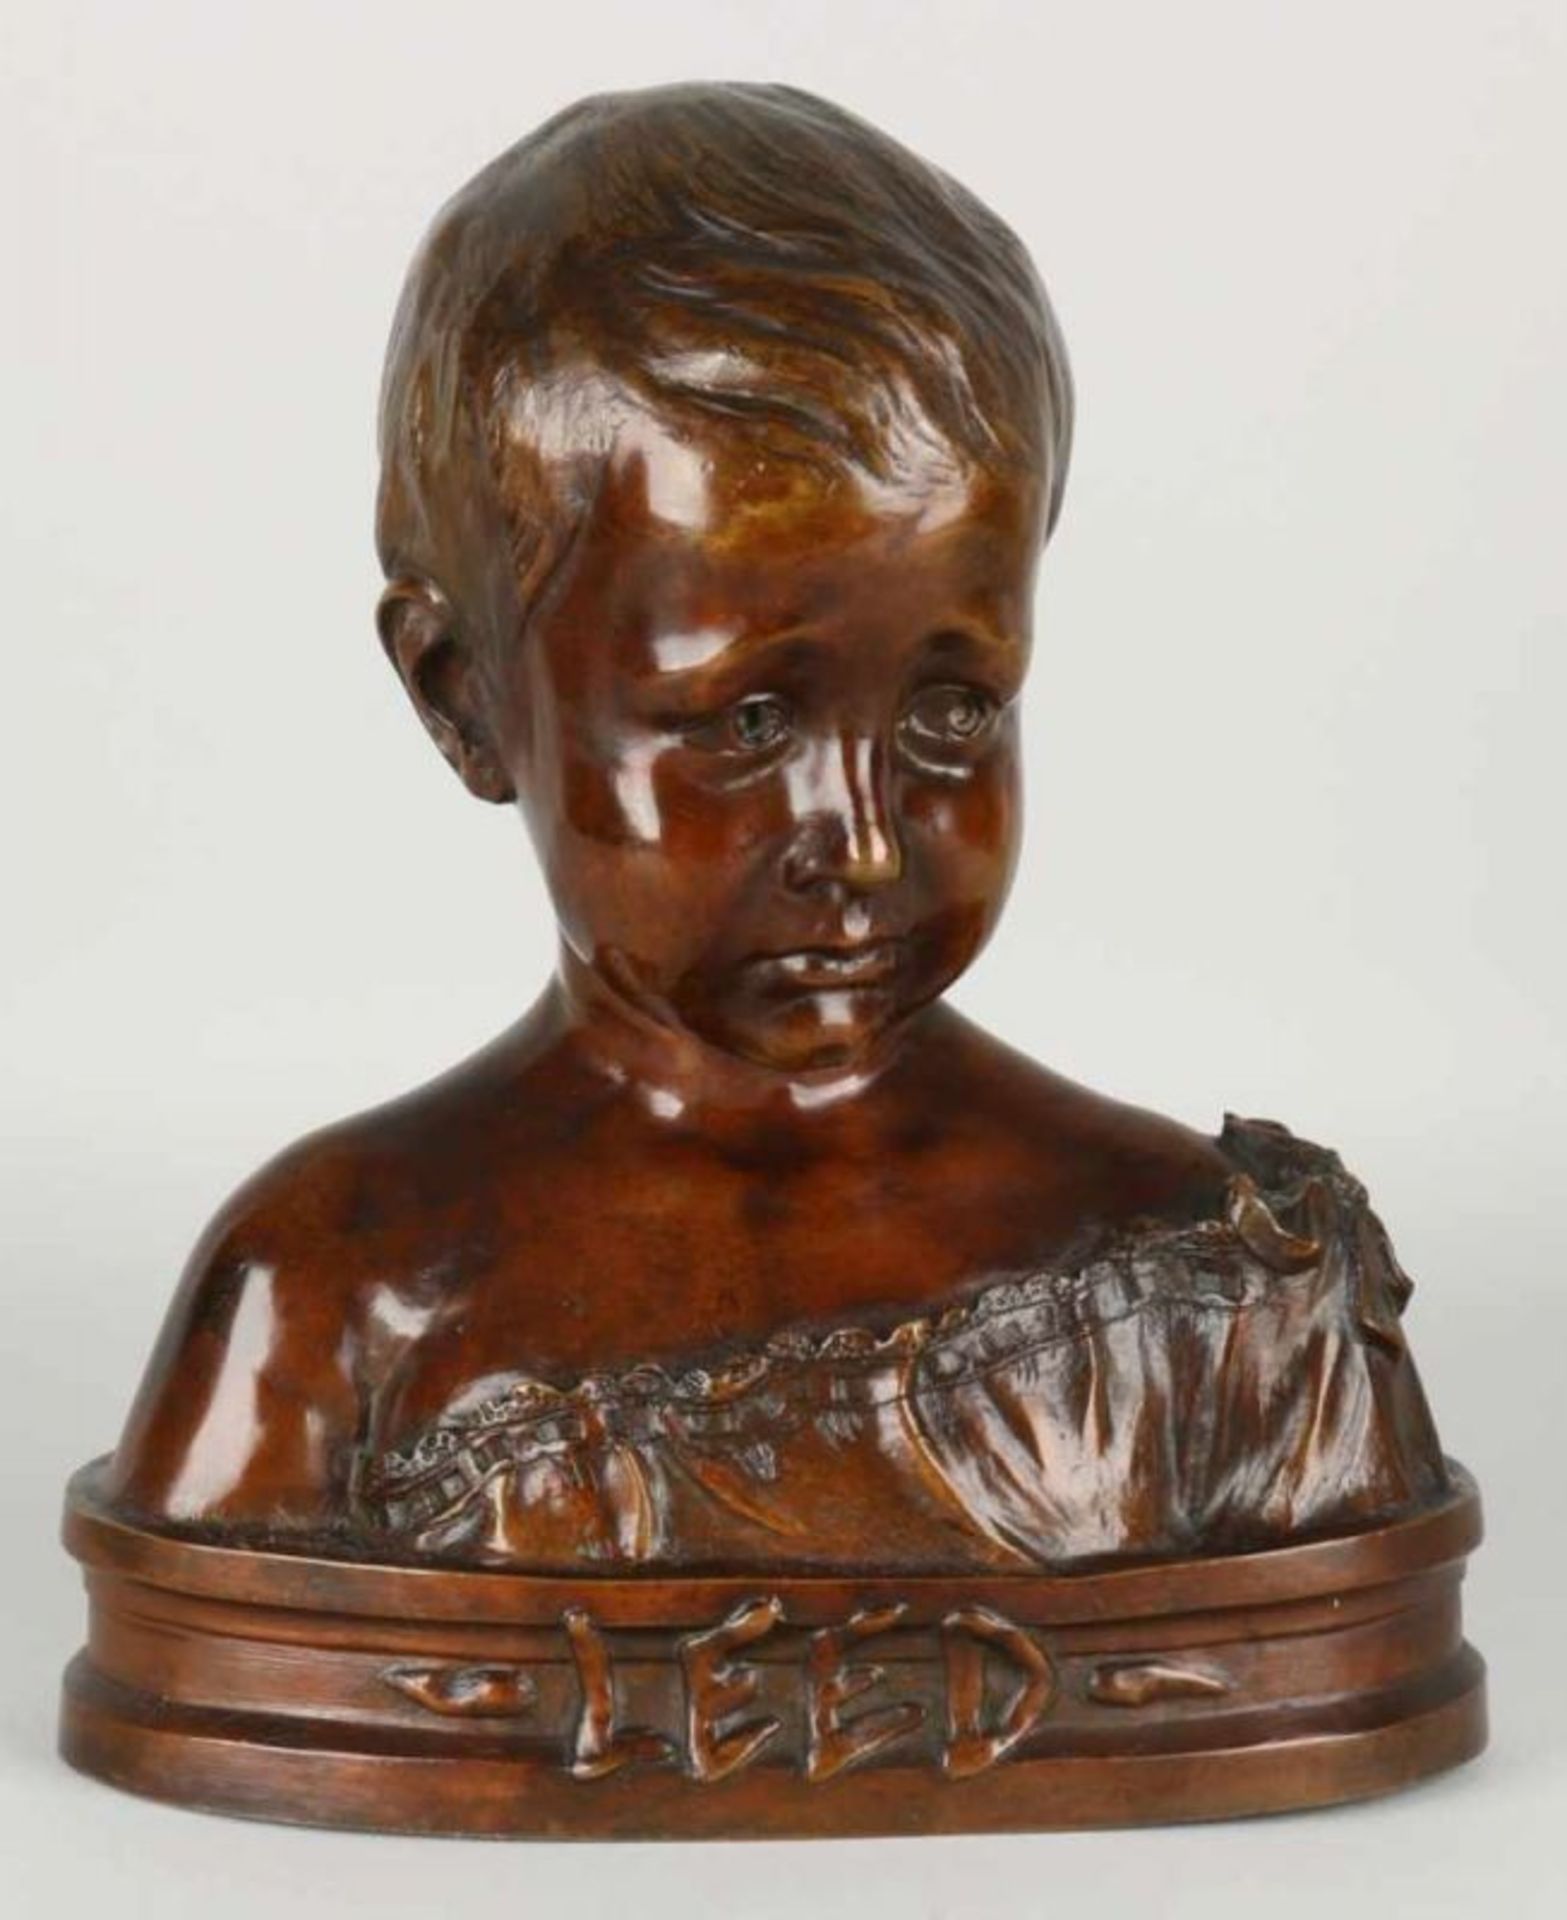 Antique bronze bust by J. Hullebroeck. Title: Leed. Size: 32 x 26 x 12 cm. In good condition. Antike